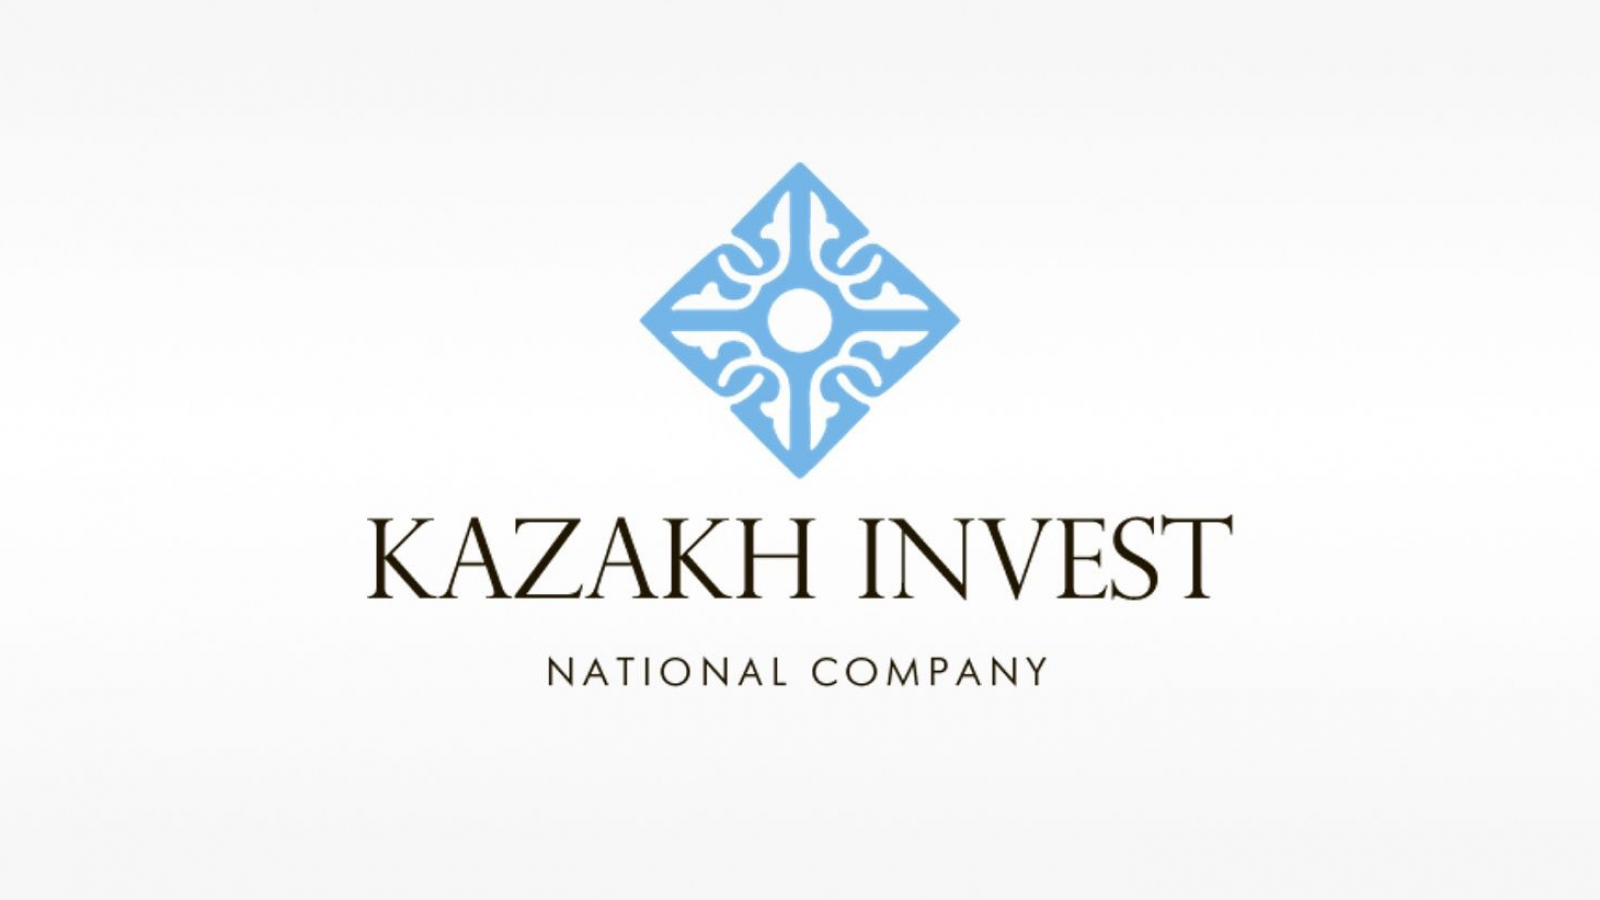 KAZAKH INVEST expresses its deepest condolences to families during the tragic events in the country